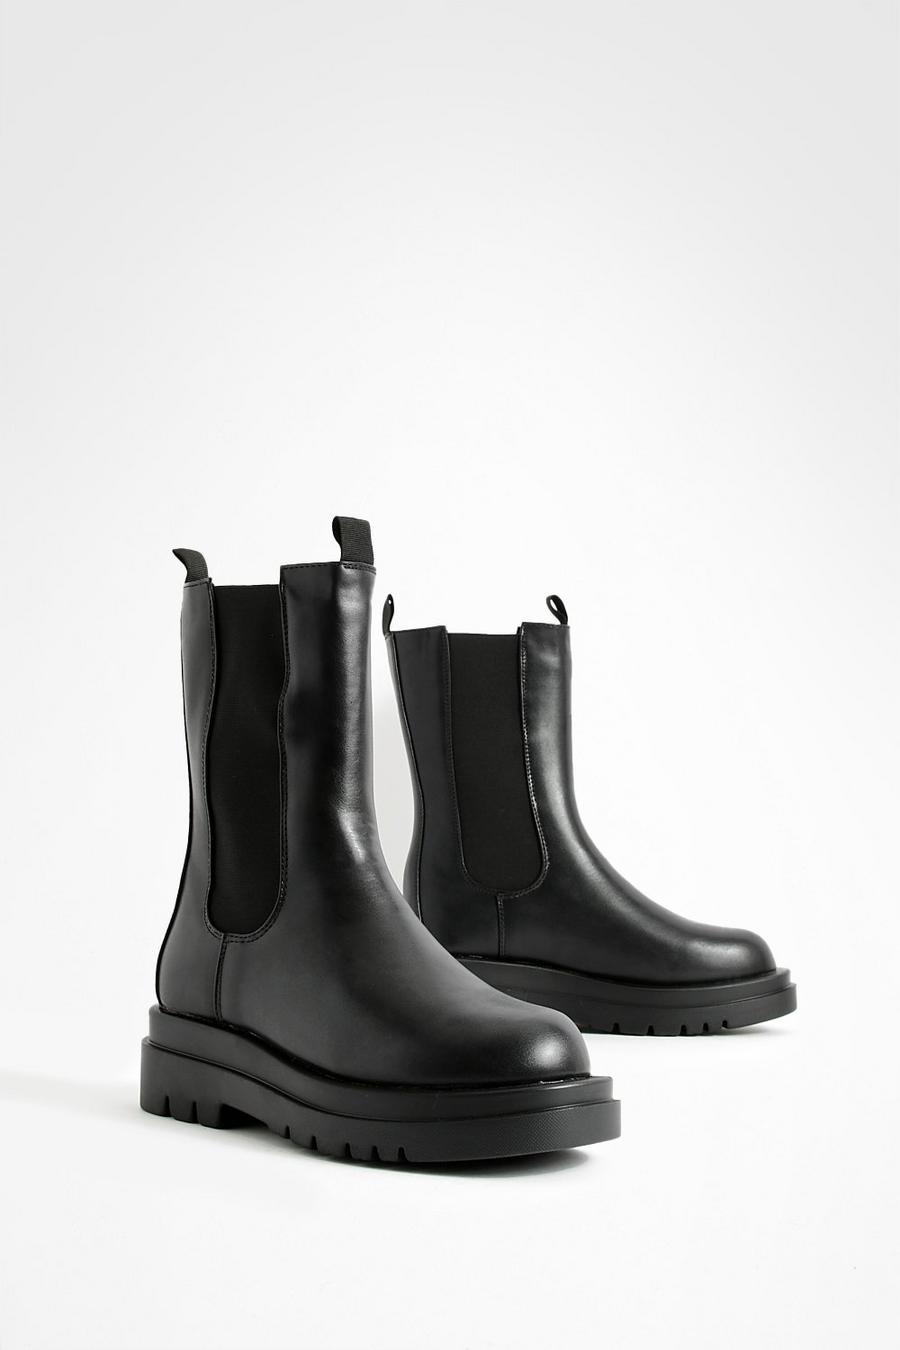 Black negro Chunky Cleated Calf High Chelsea Boots